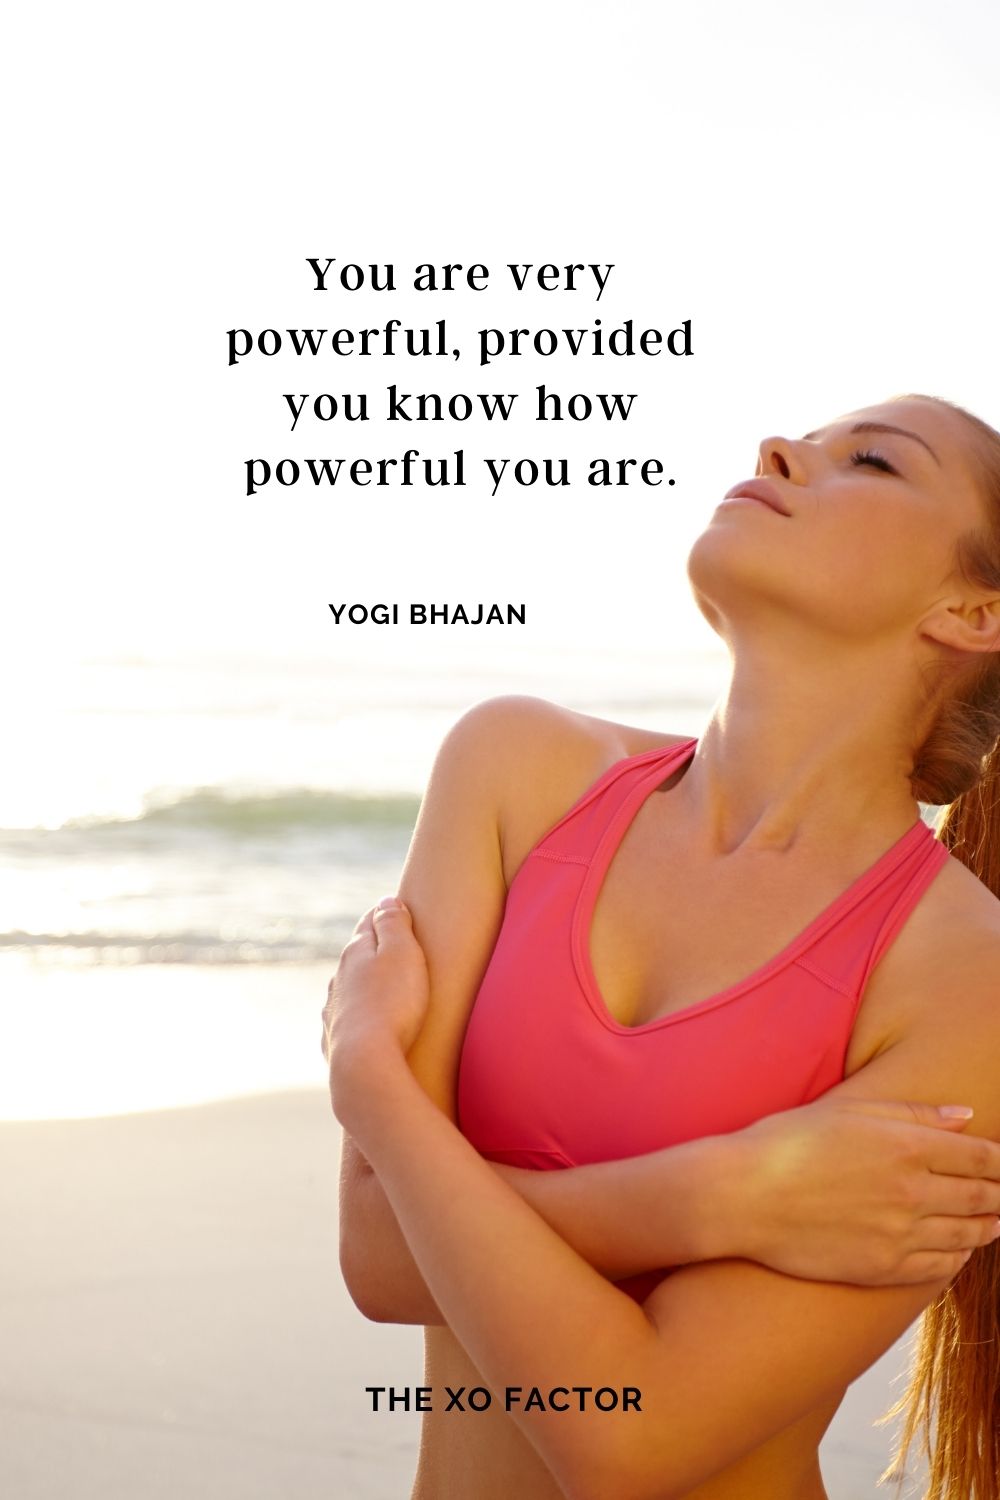 You are very powerful, provided you know how powerful you are. Yogi Bhajan